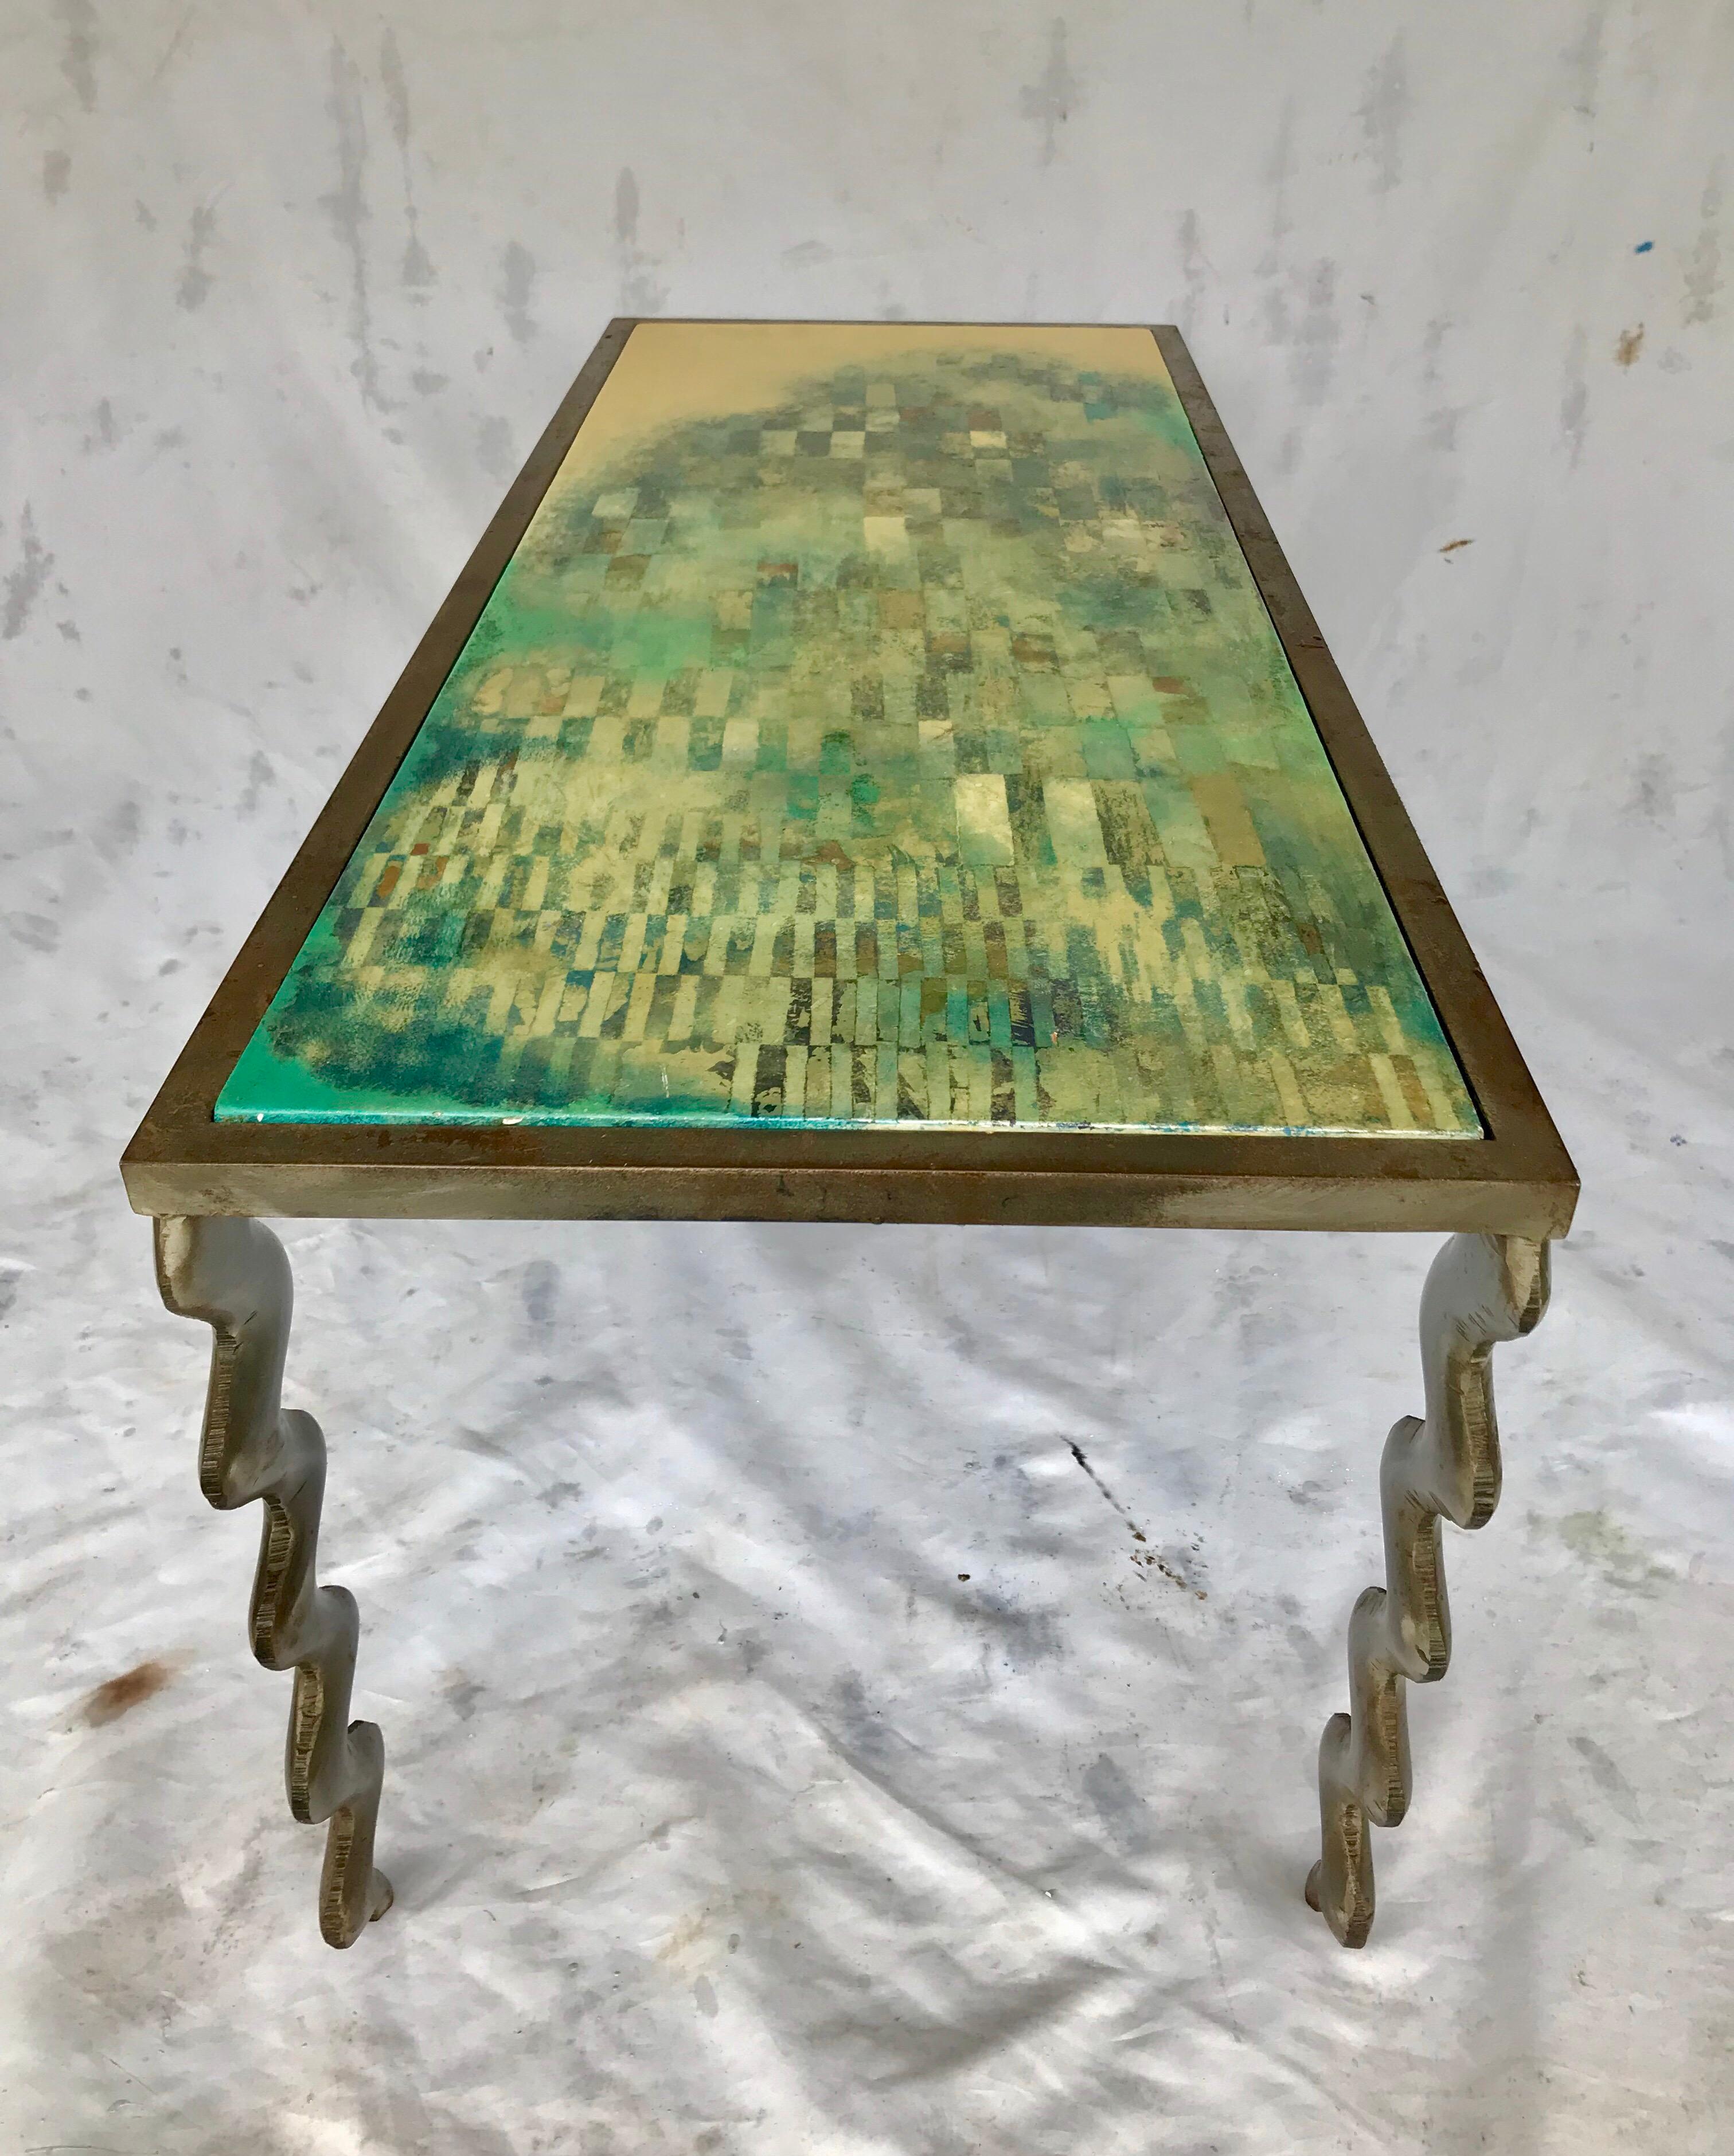 Studio Made Modernist Cocktail Table with Zig Zag Legs In Good Condition For Sale In Charlottesville, VA